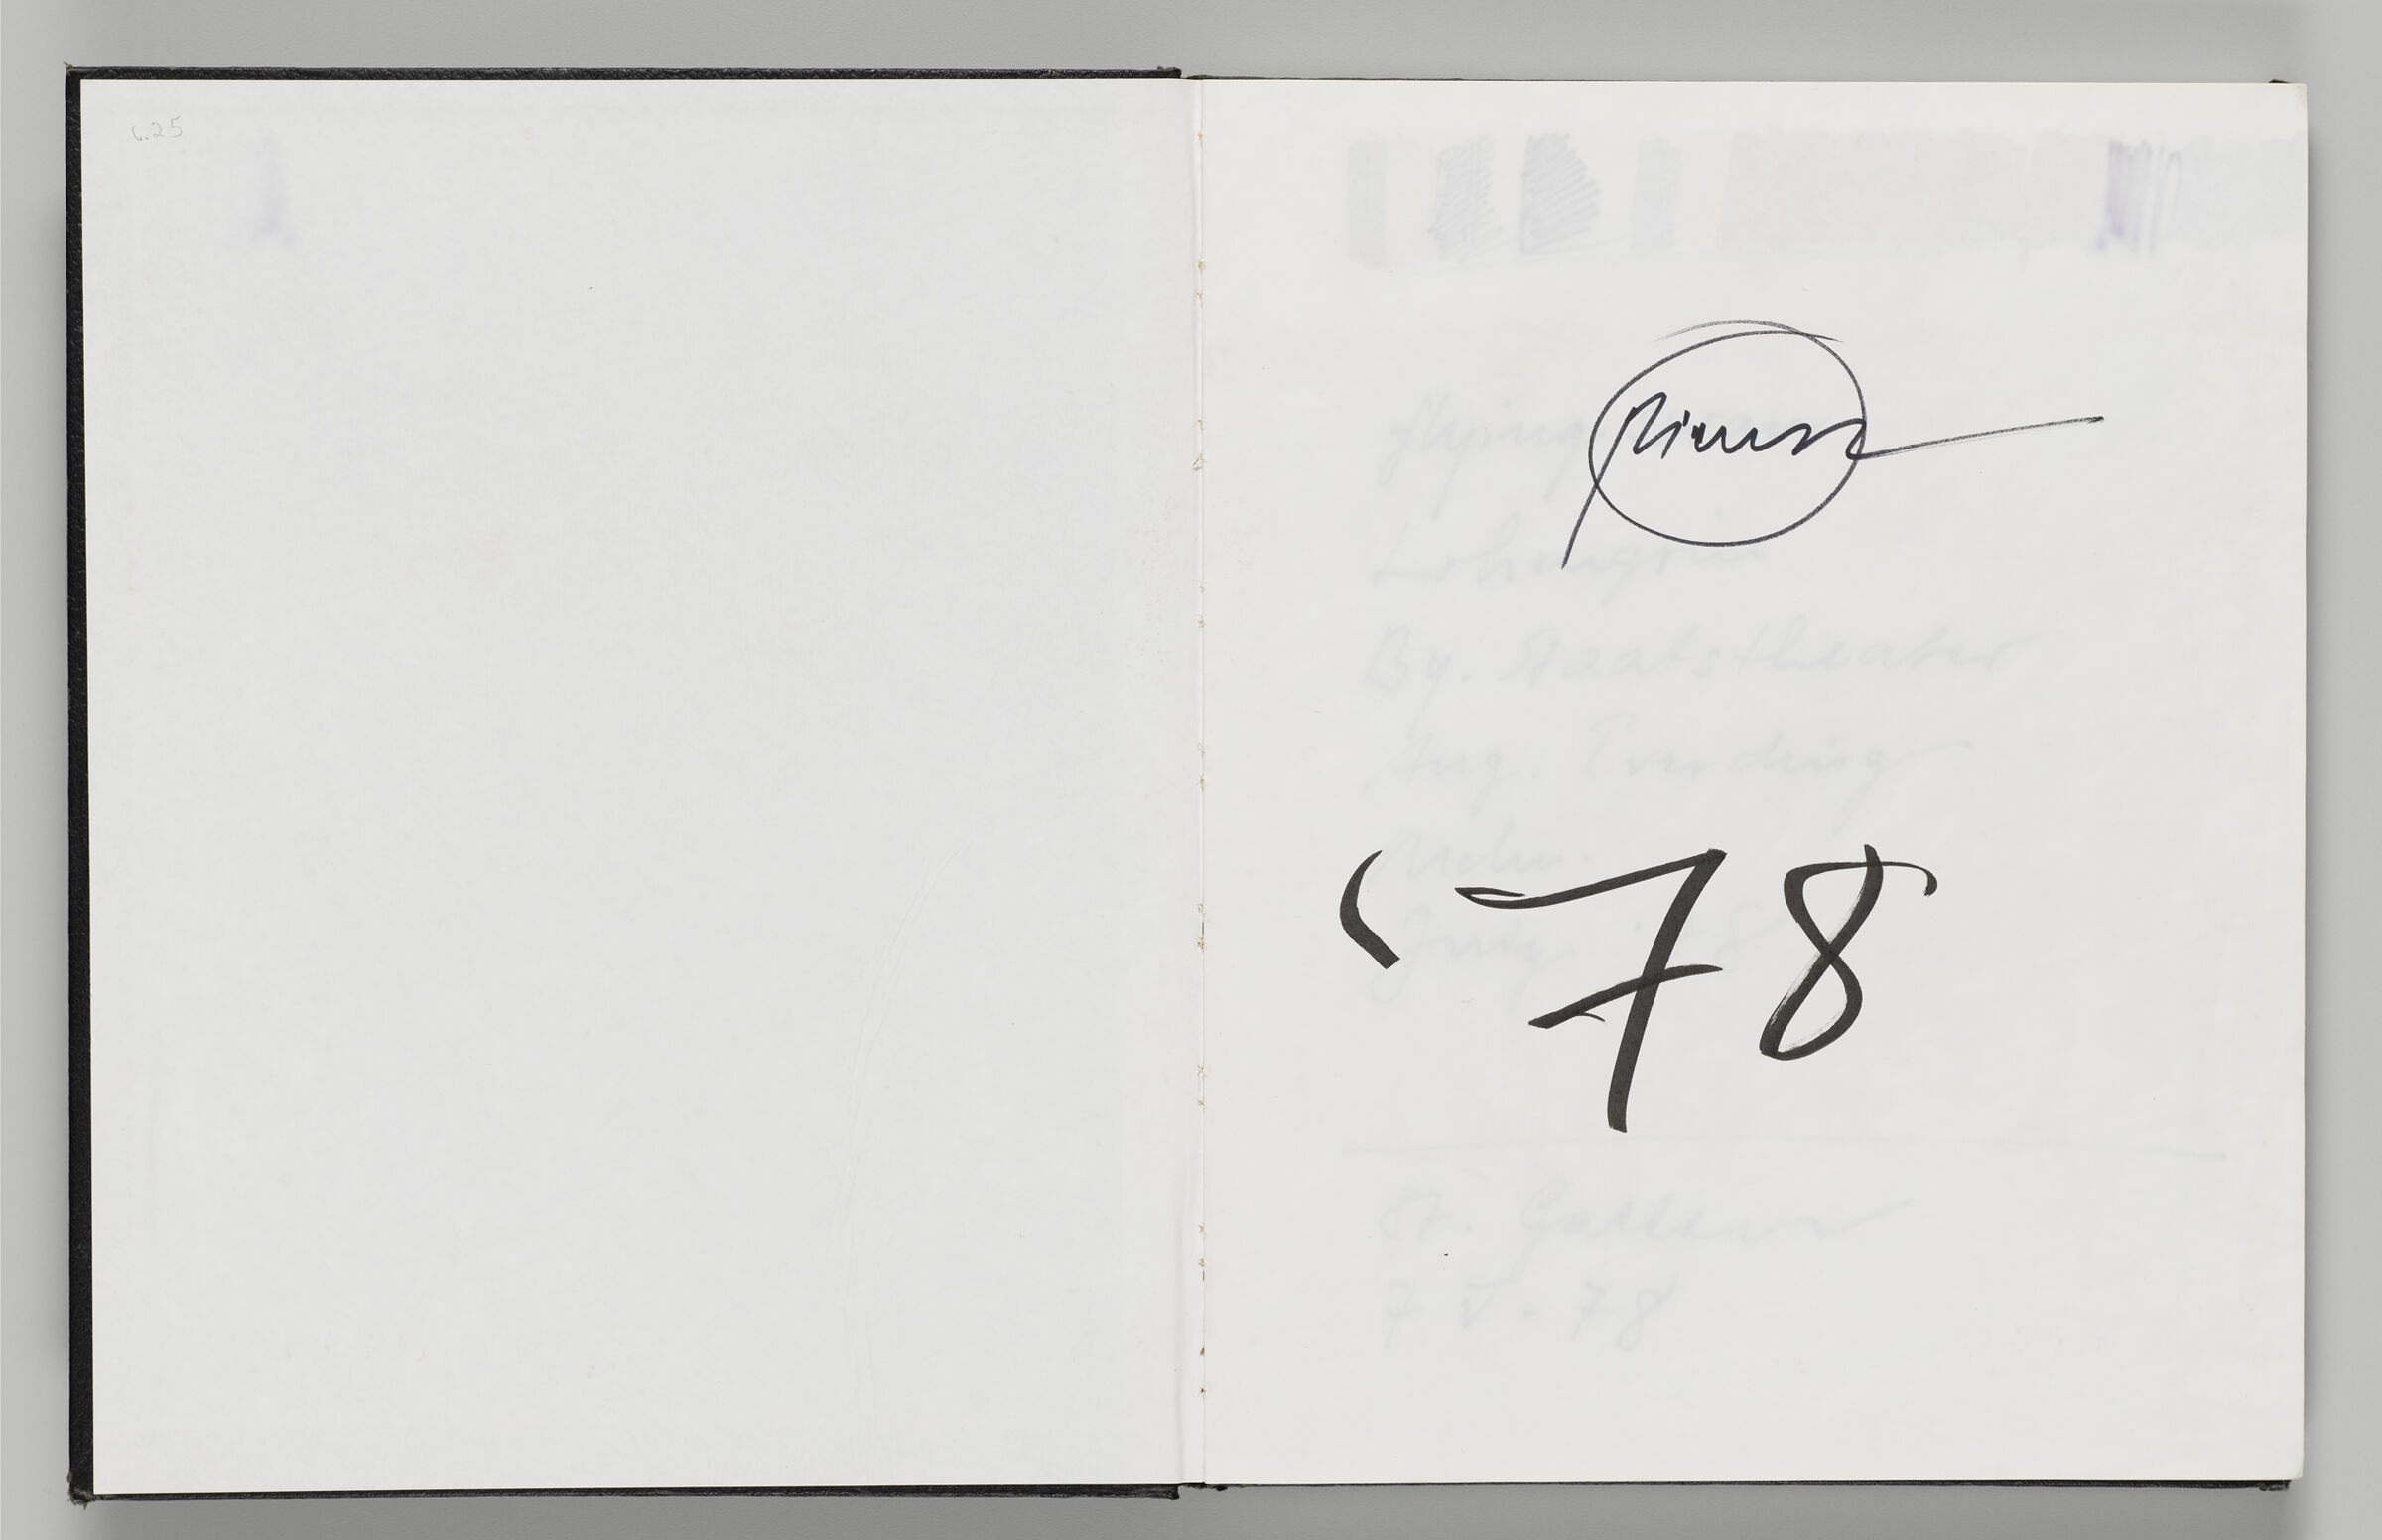 Untitled (Front Endpaper With Price, Left Page); Untitled (Signature, Right Page)